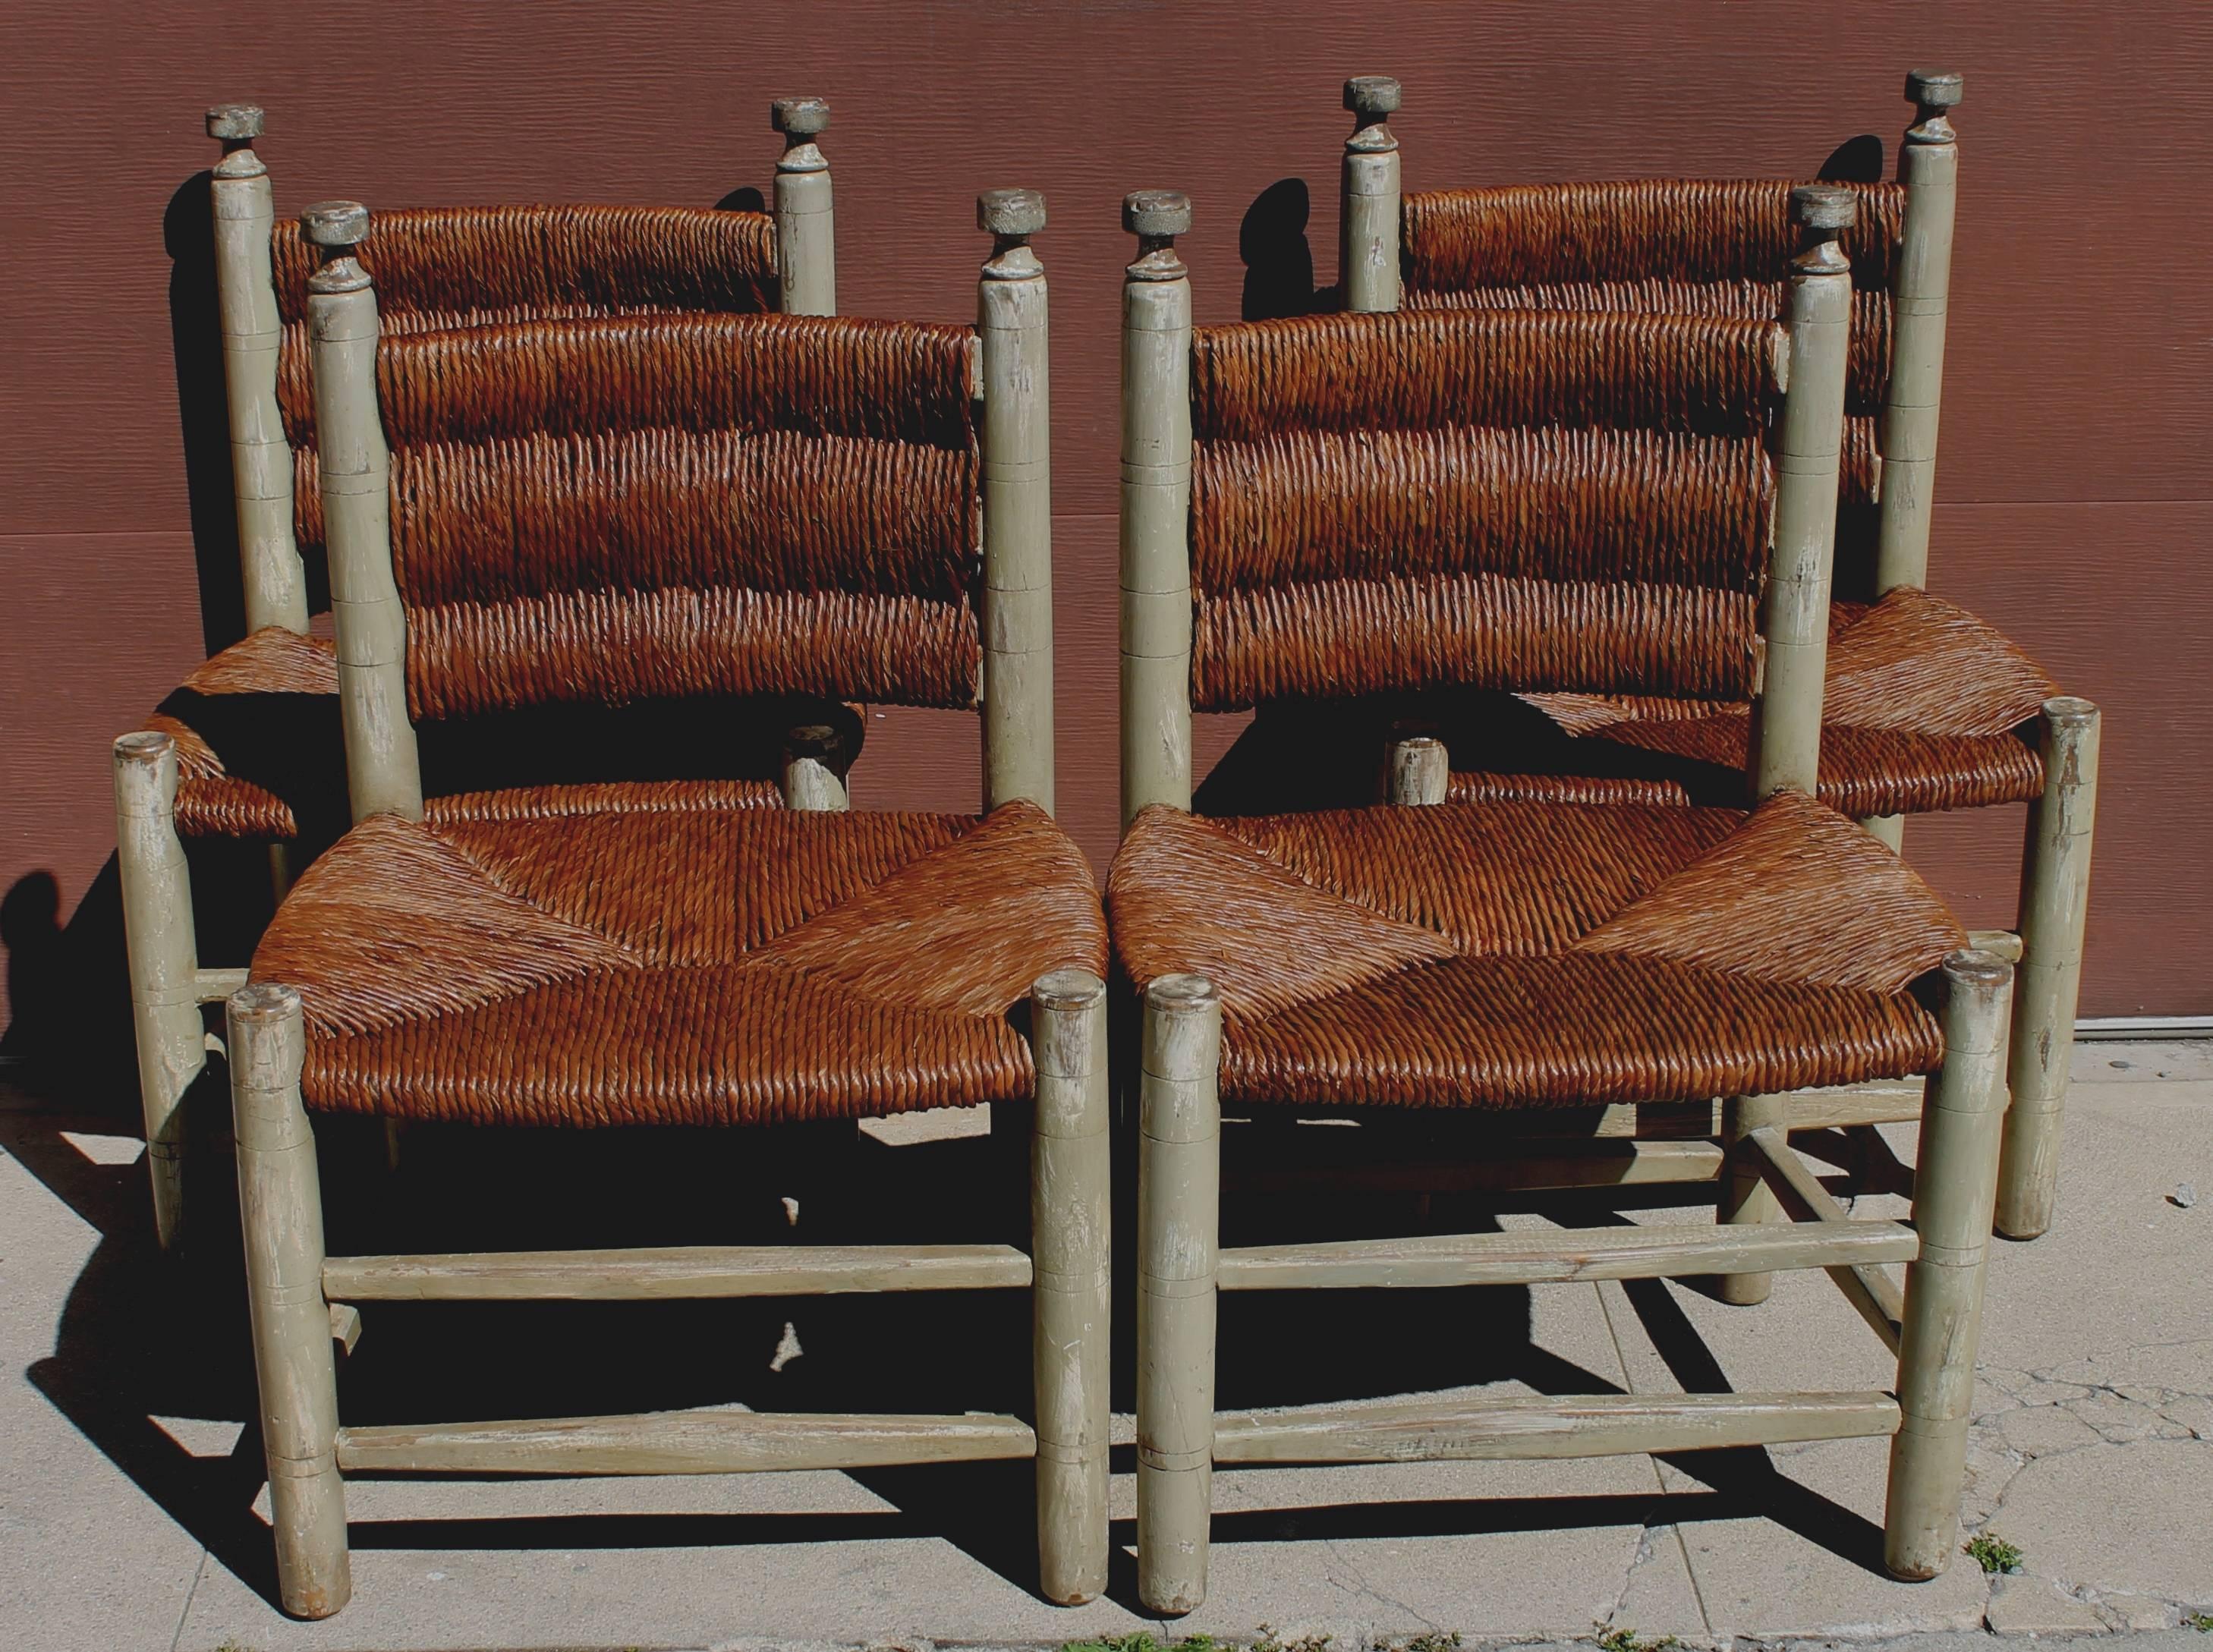 Set of four barrel back rush chairs in great condition. These four super comfortable original worn surface rush seat and back chairs. The condition is very strong and sturdy. The painted surface is worn with a fantastic patina.